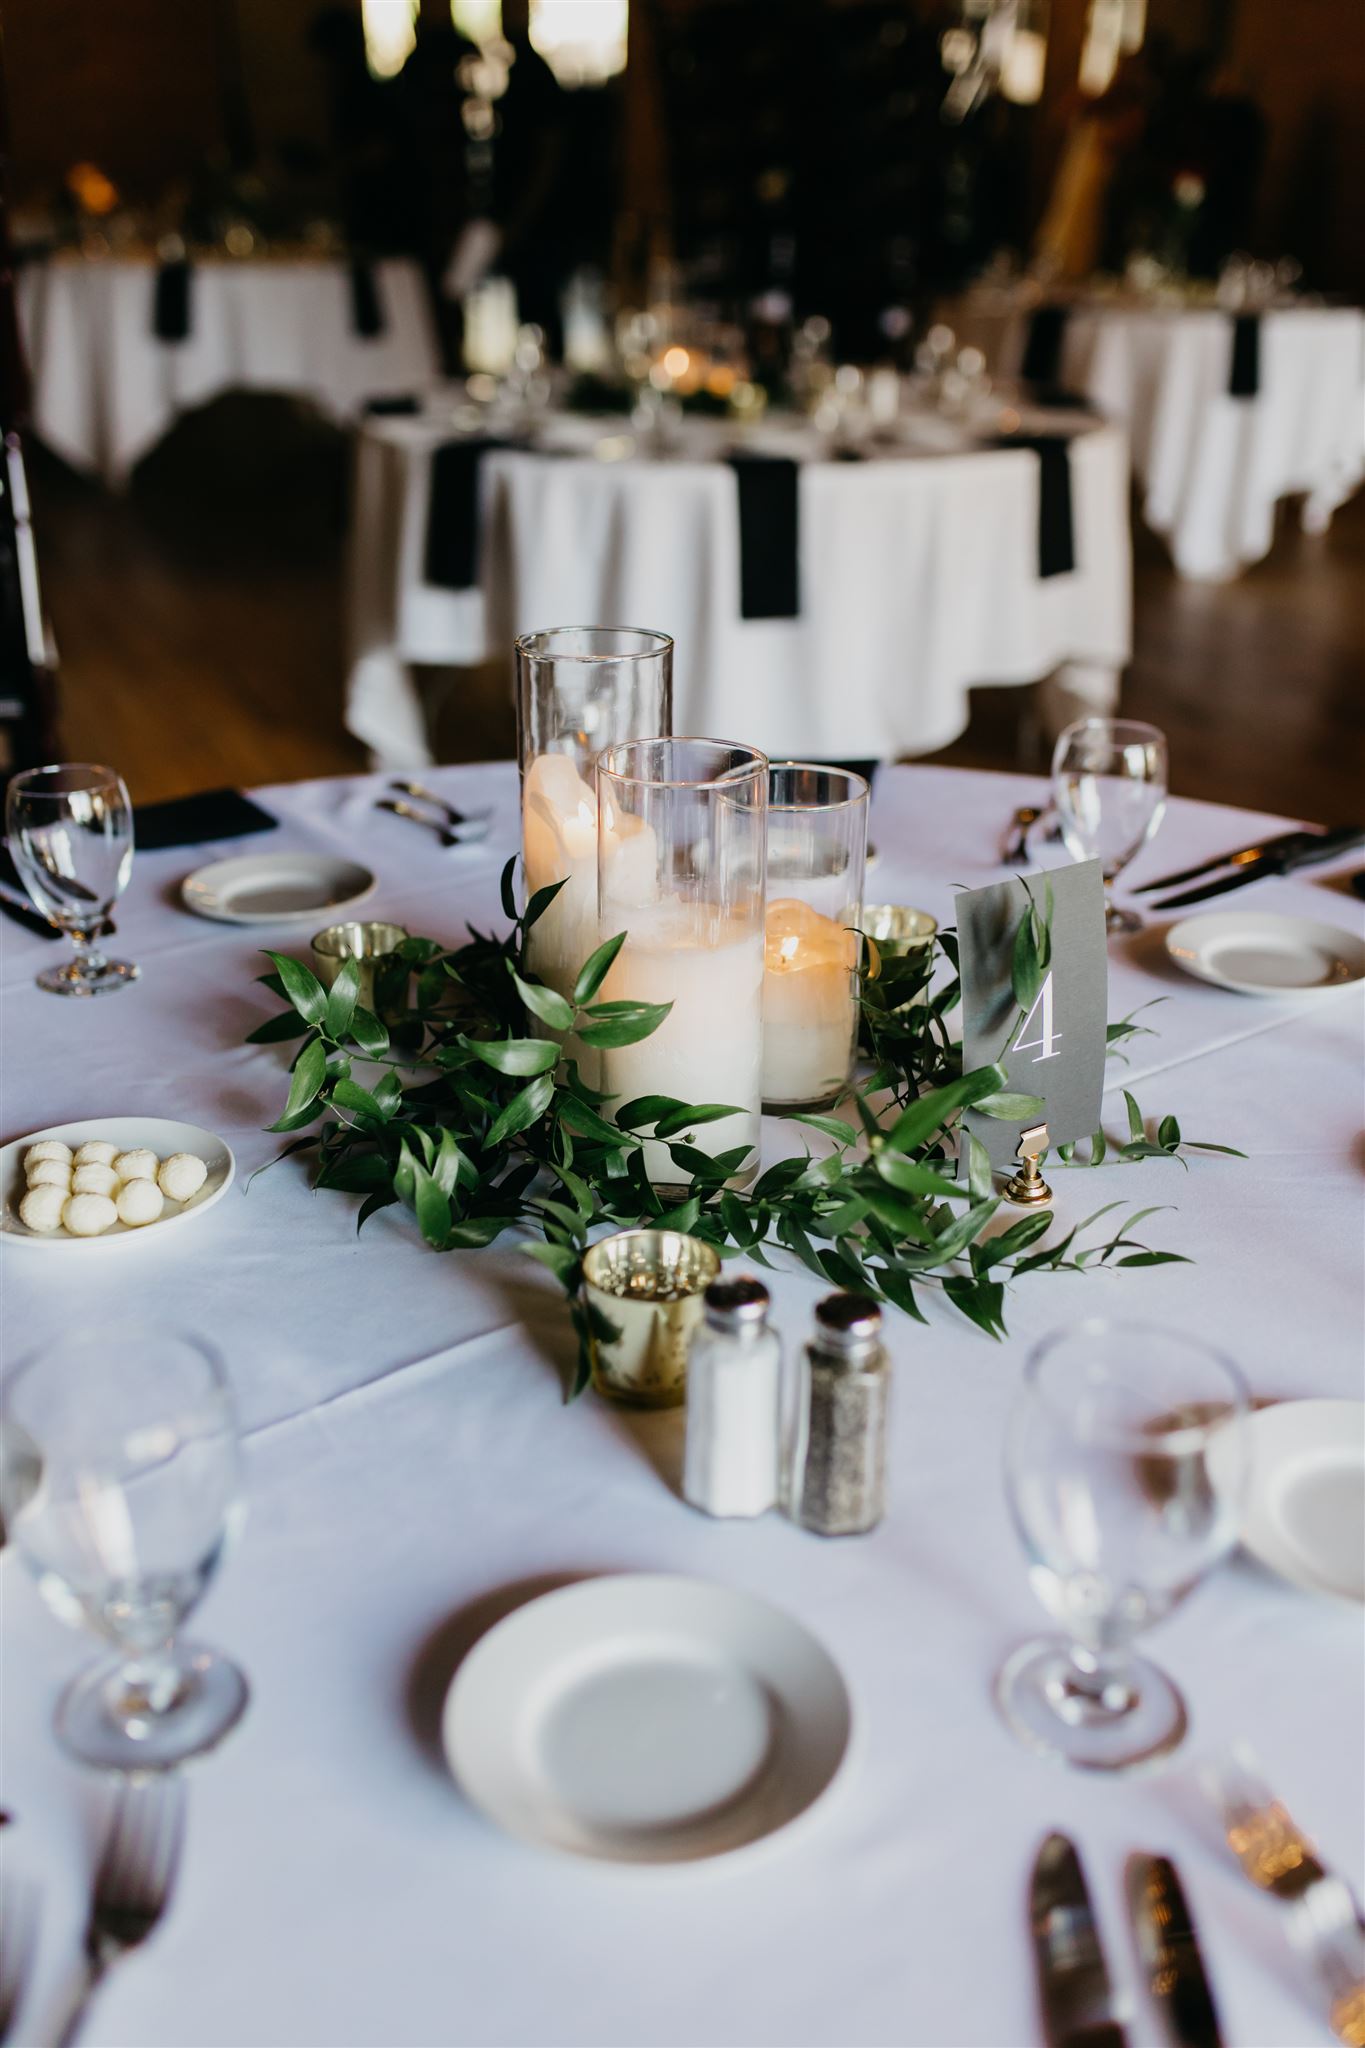 The table arrangement at the wedding reception held at Minneapolis Event Center